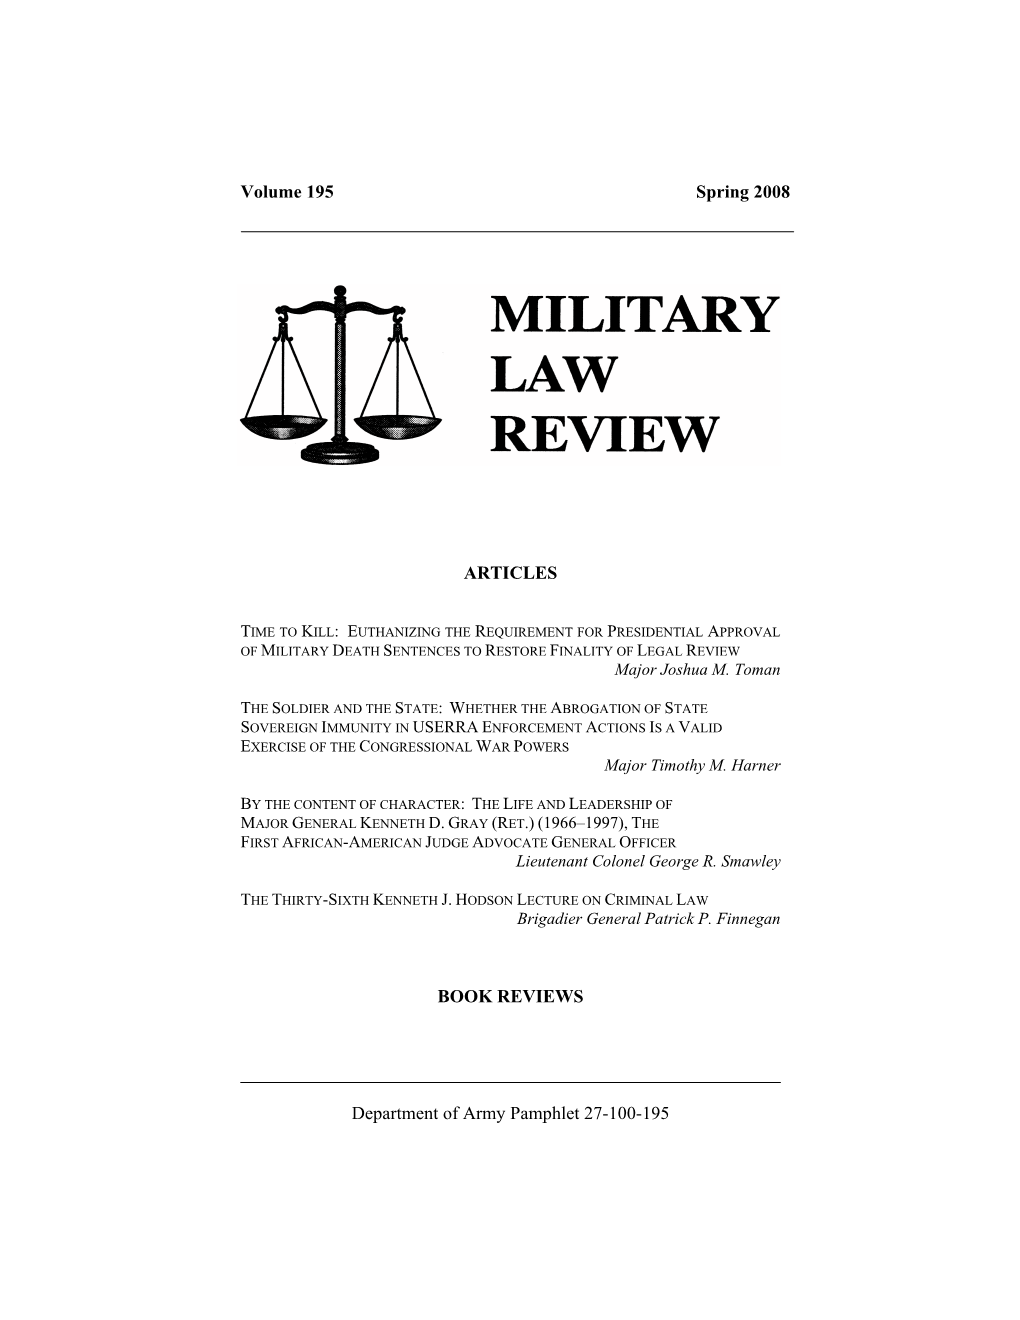 Volume 195 Spring 2008 ARTICLES BOOK REVIEWS Department of Army Pamphlet 27-100-195